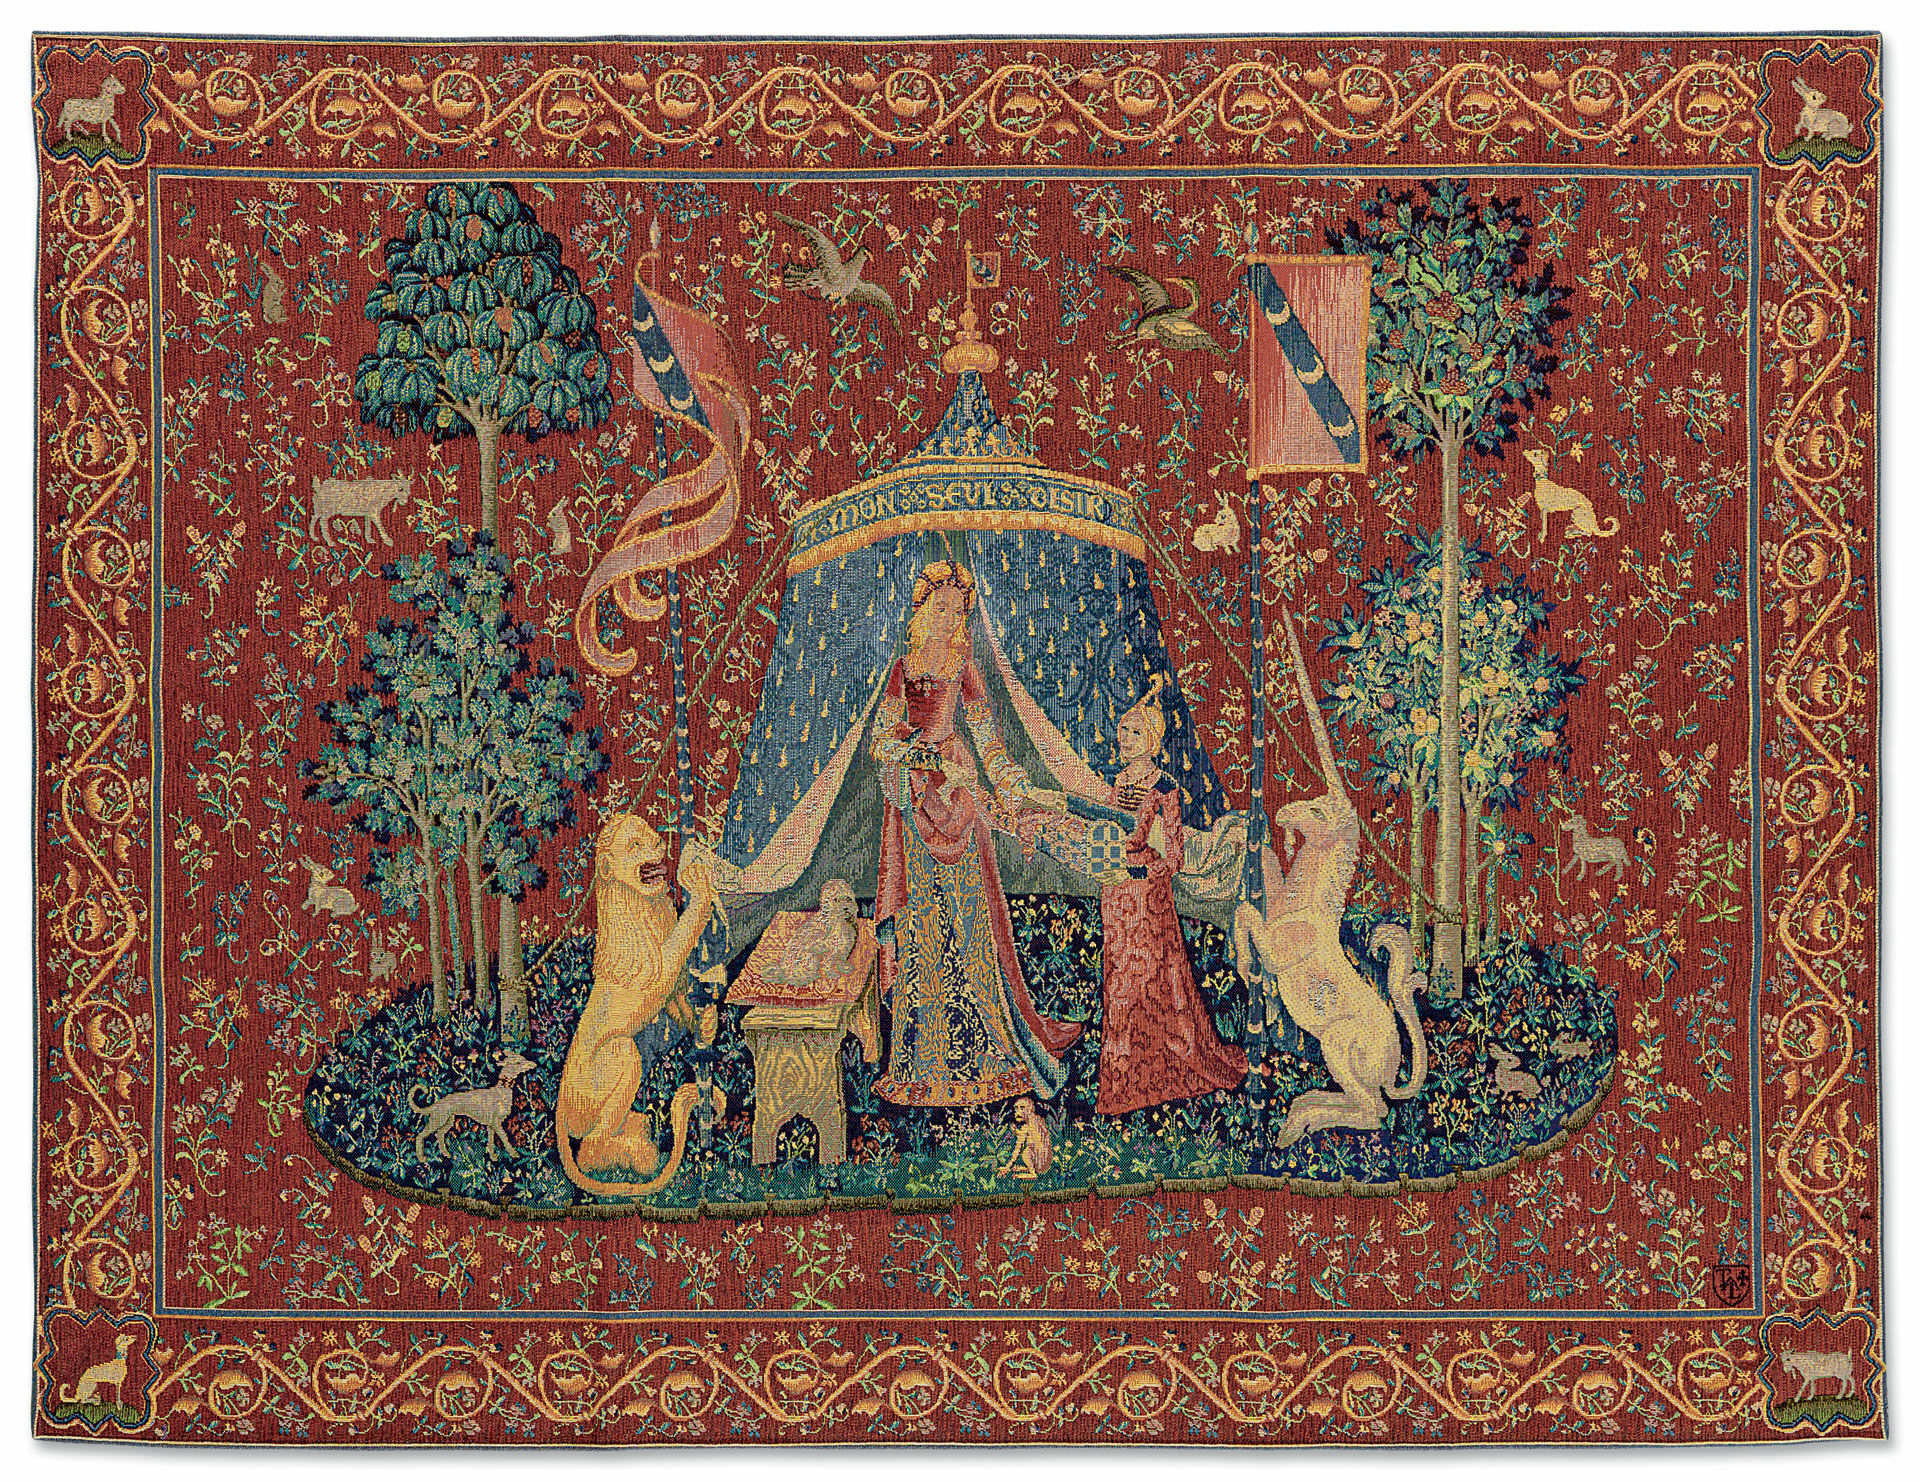 Tapestry "A mon seul désir" (My Only Wish)